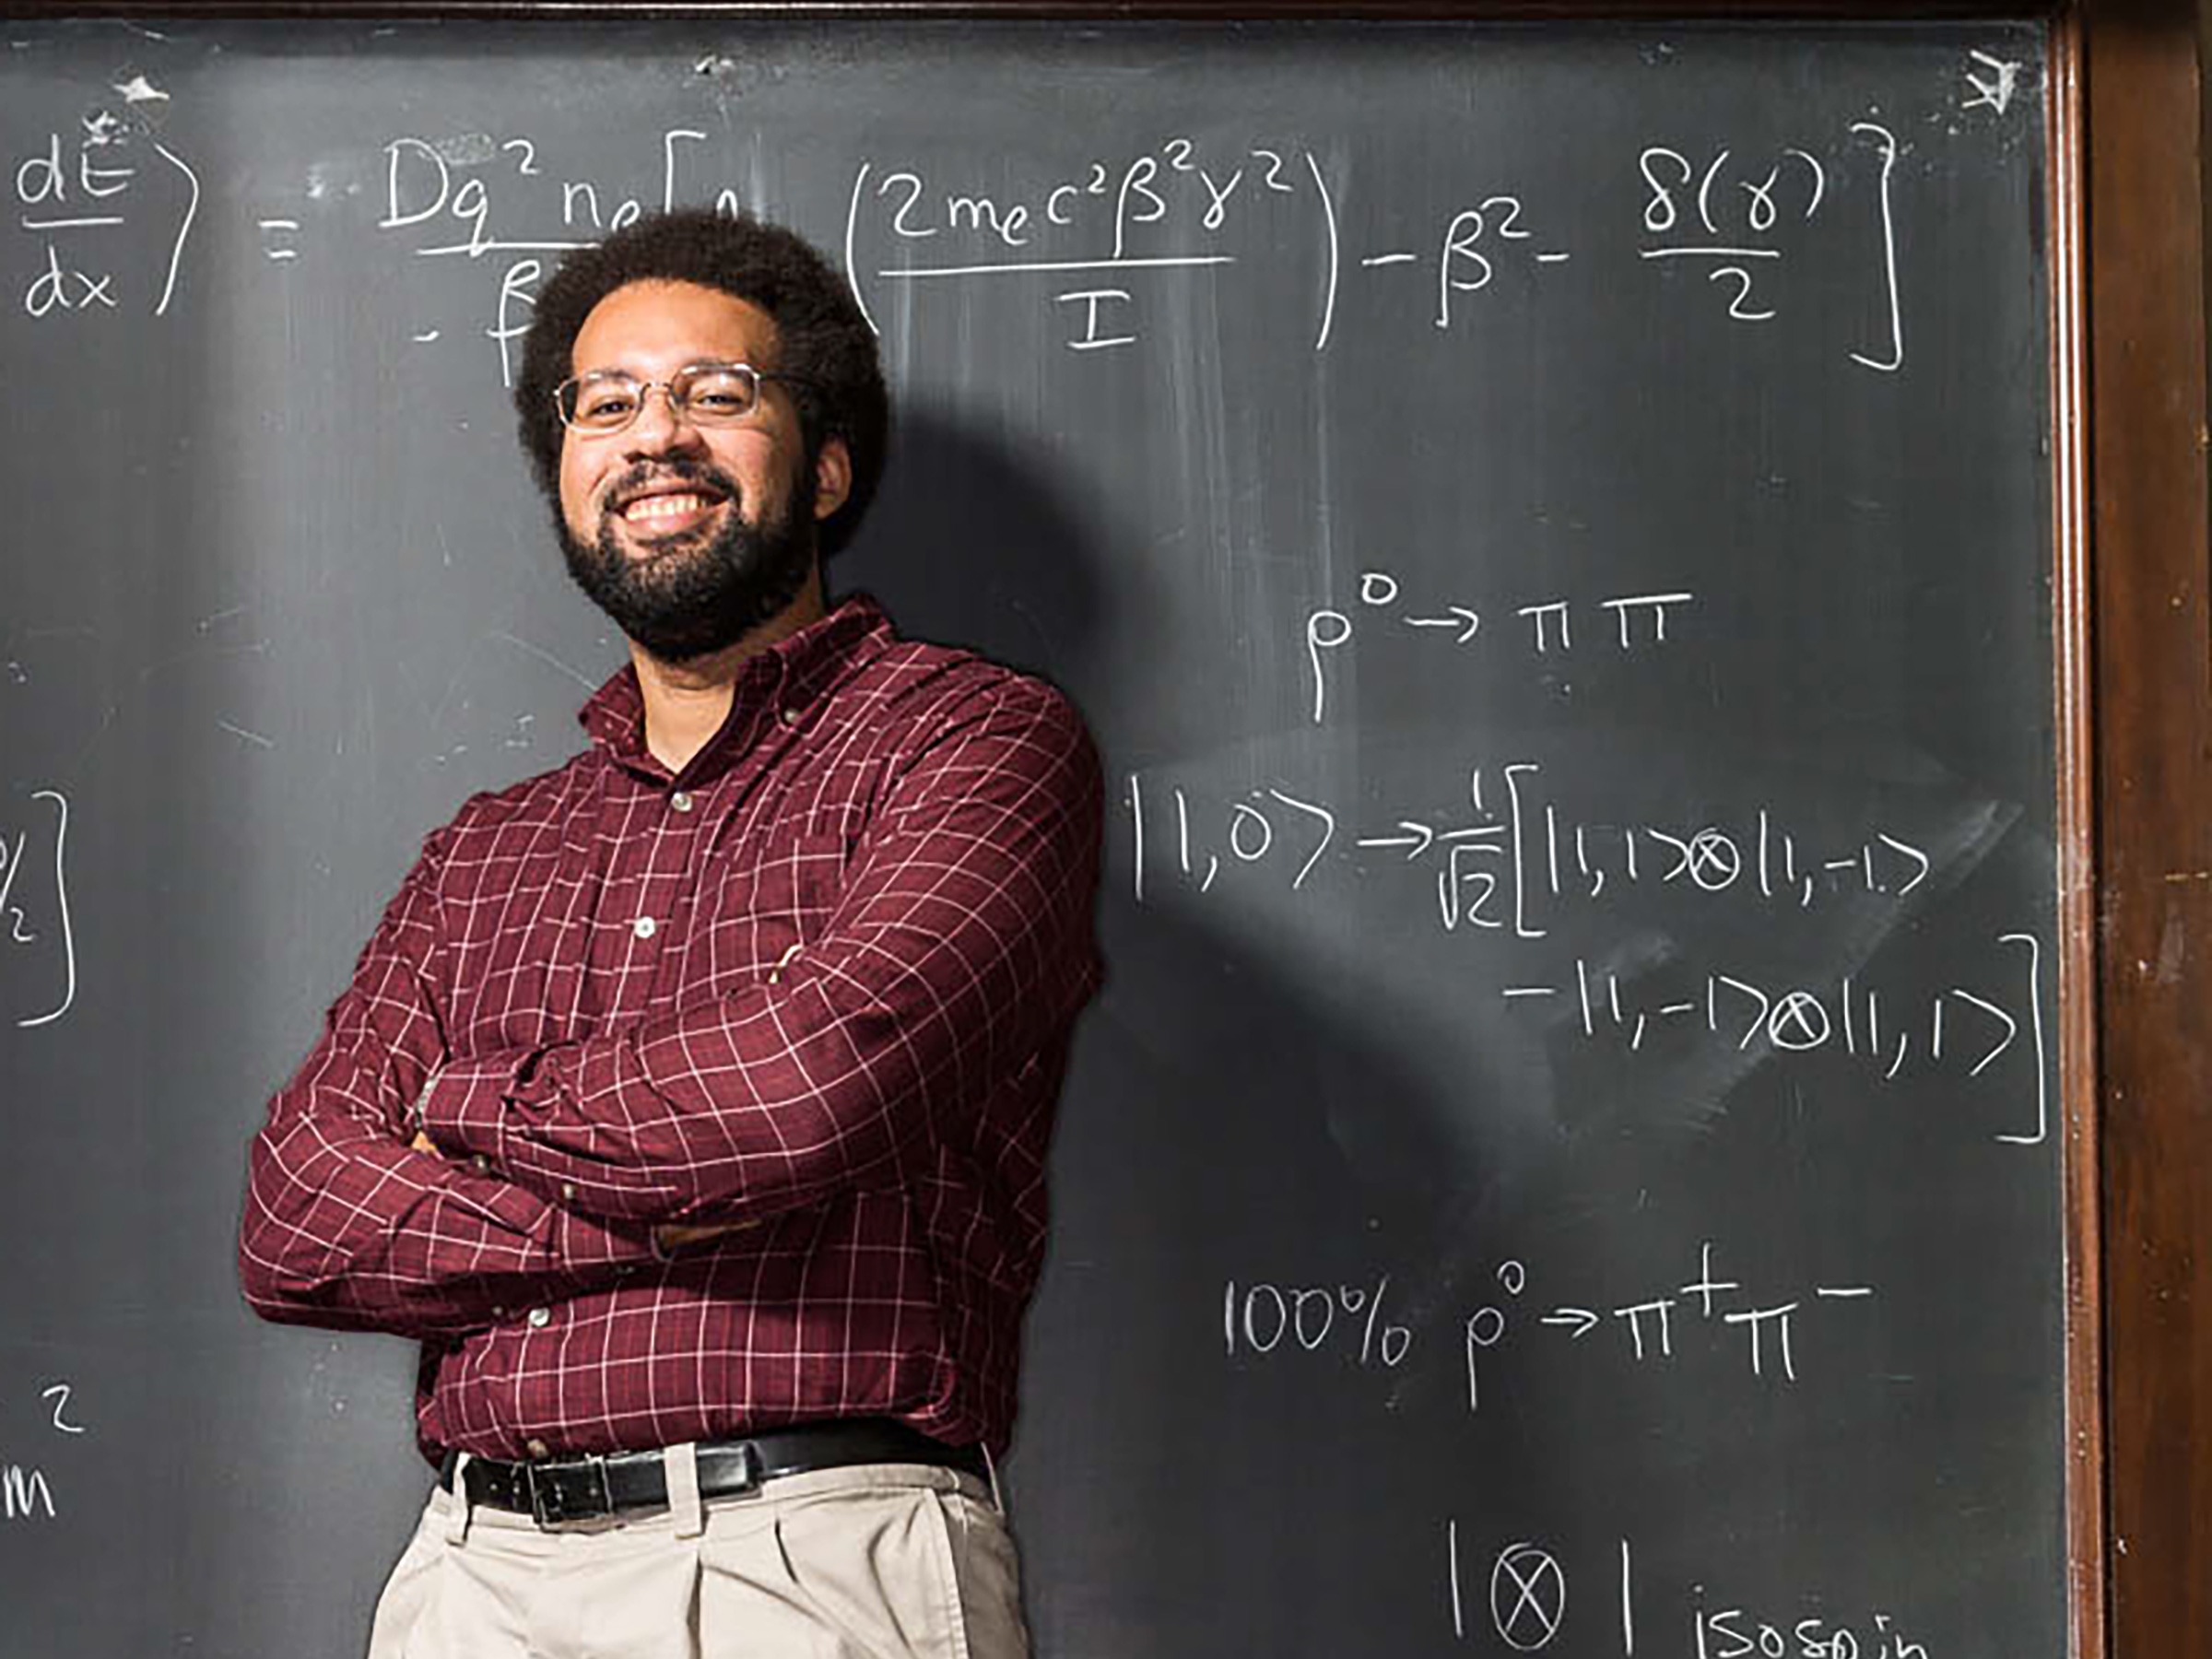 A man stands with arms crossed in front of a chalk board with mathematical equations